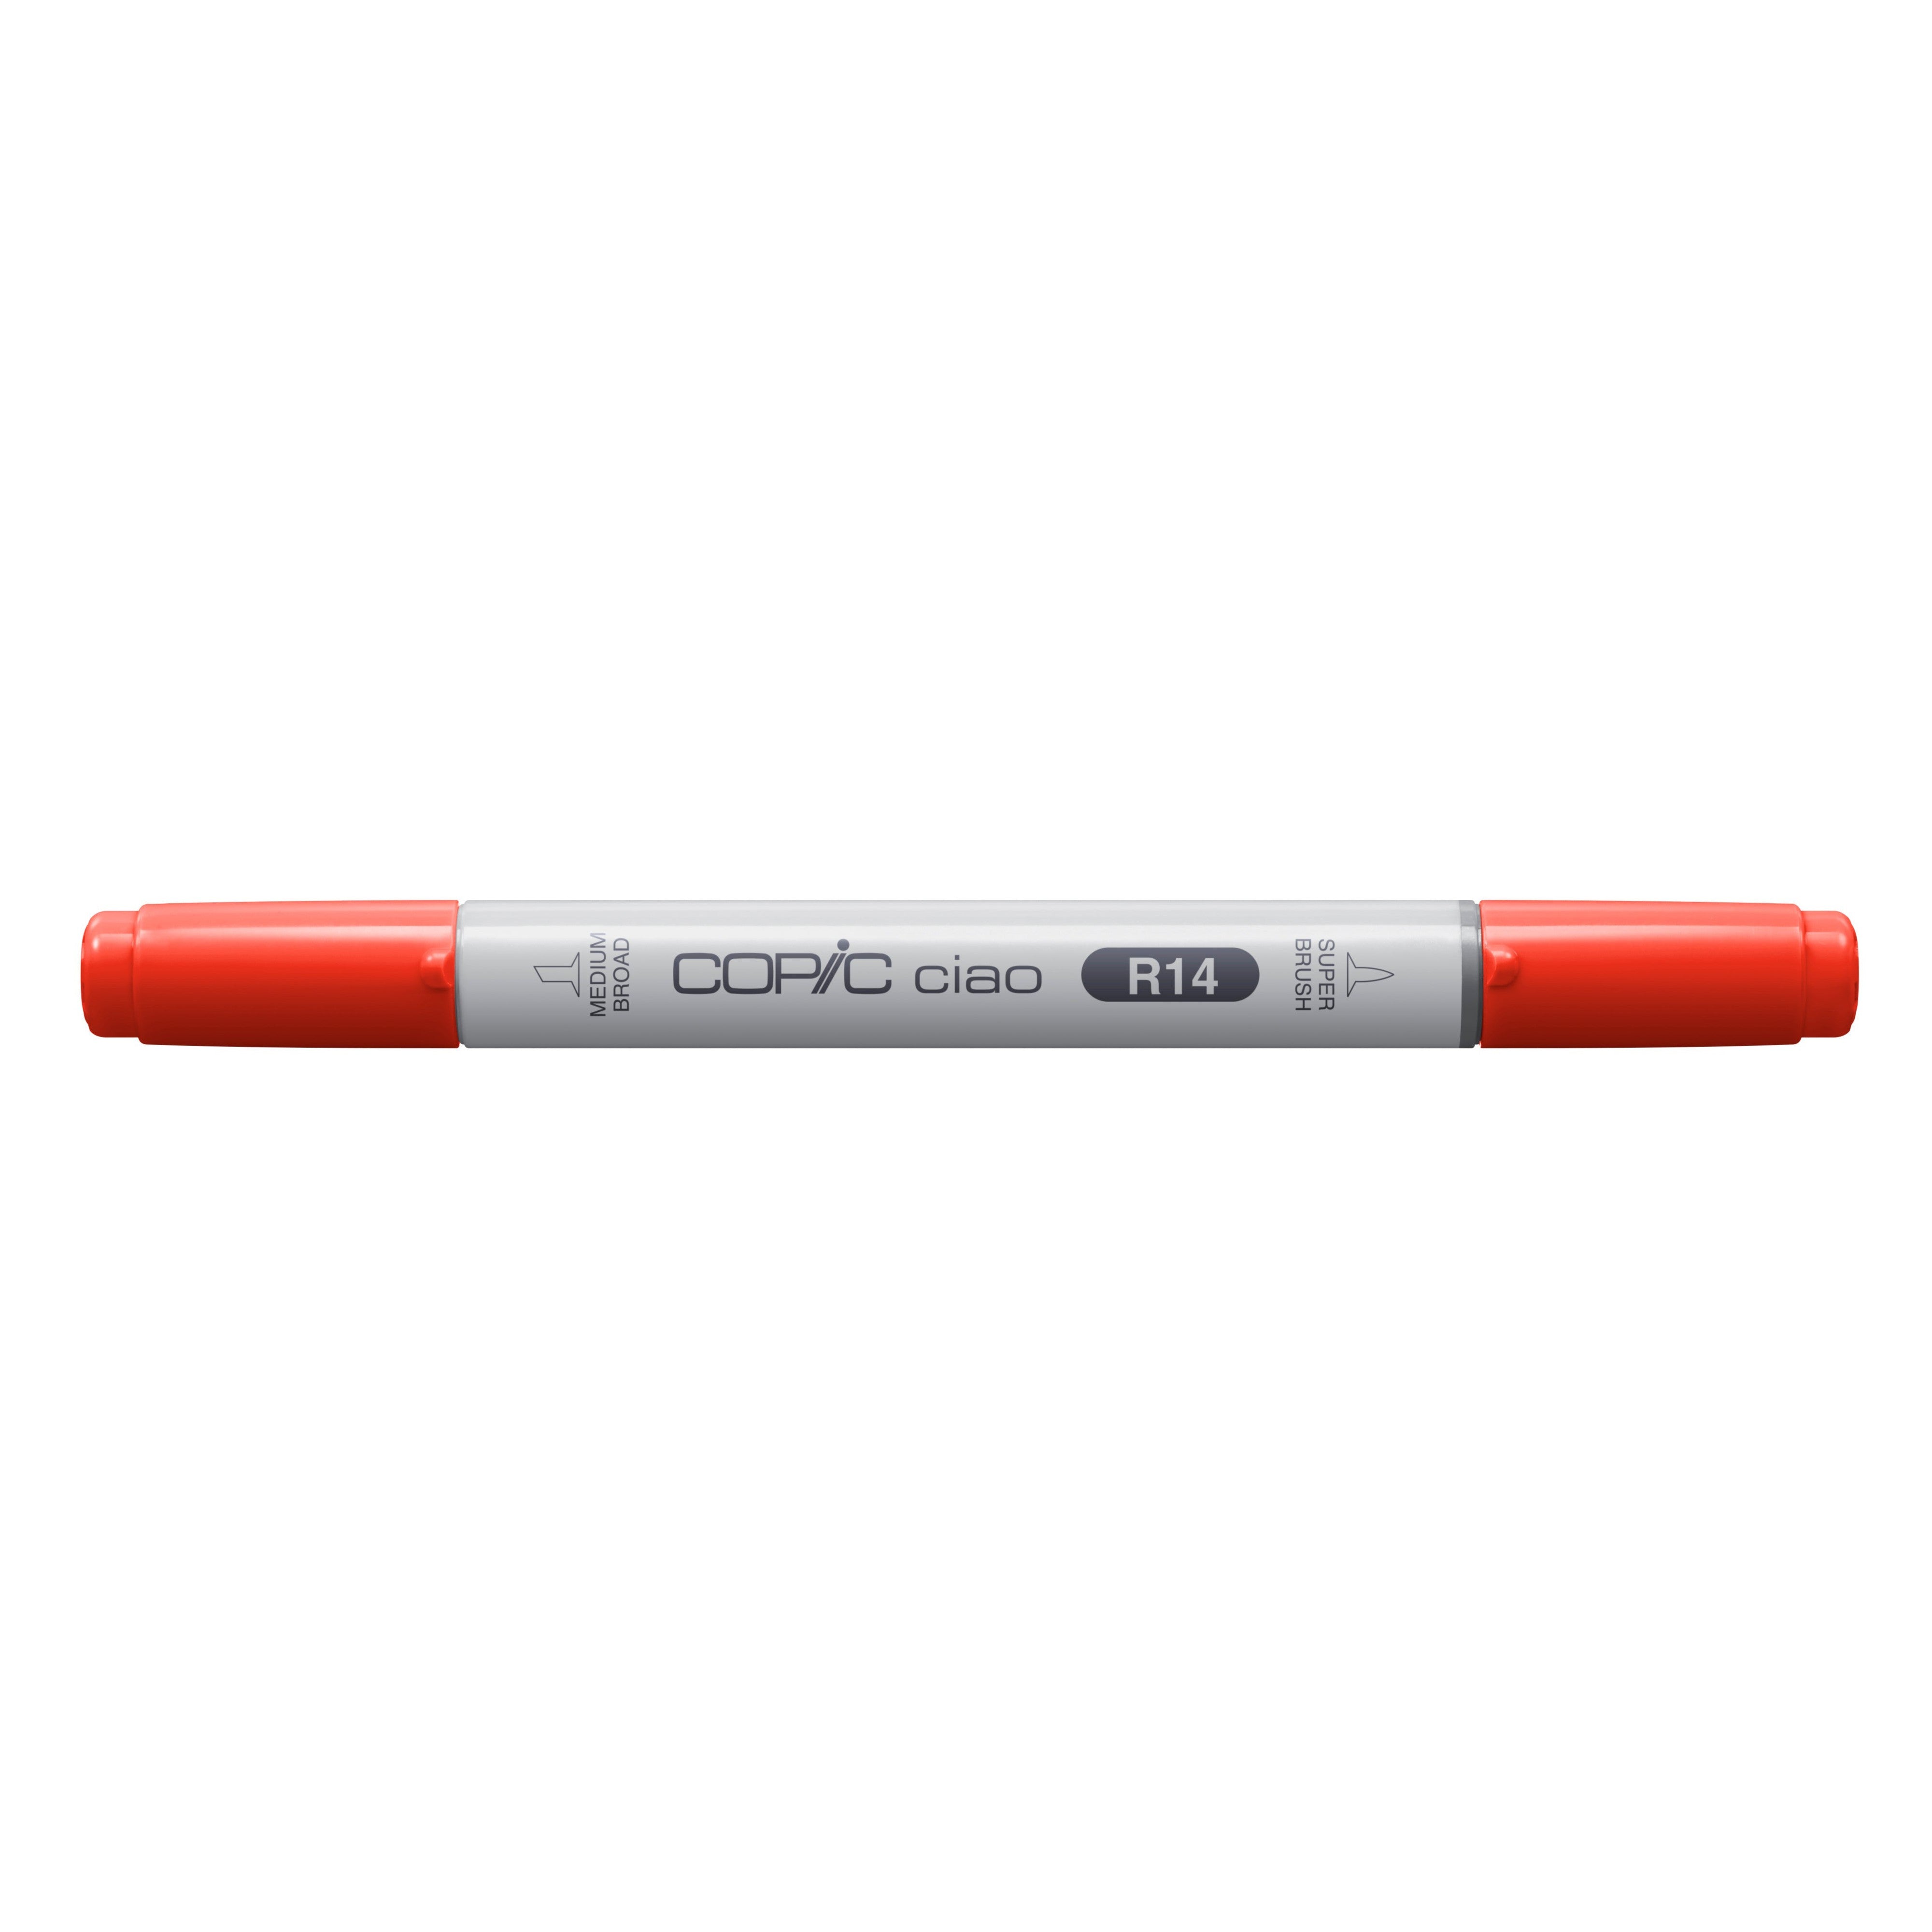 Copic - Ciao Marker - Light Rouge - R14